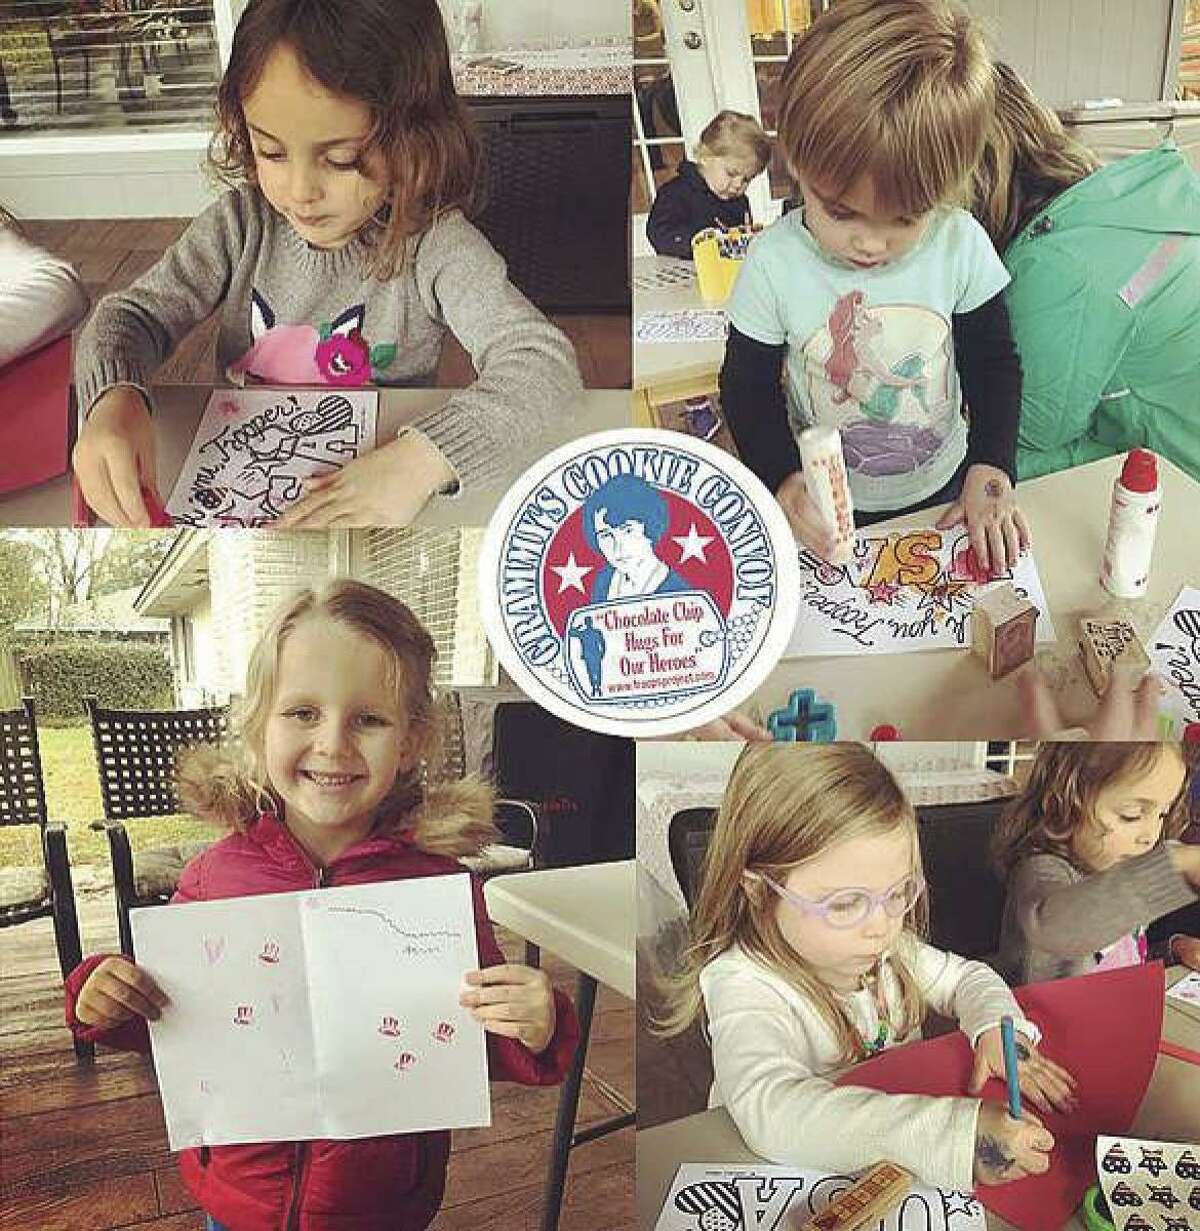 Children create drawings and write thank-you notes as part of Grammy’s Cookie Convoy,Inc., a 501 c 3 nonprofit, that sends gourmet chocolate chip cookies to service personnel stationed overseas. Funds from a November 8 golf tournament will benefit the efforts.